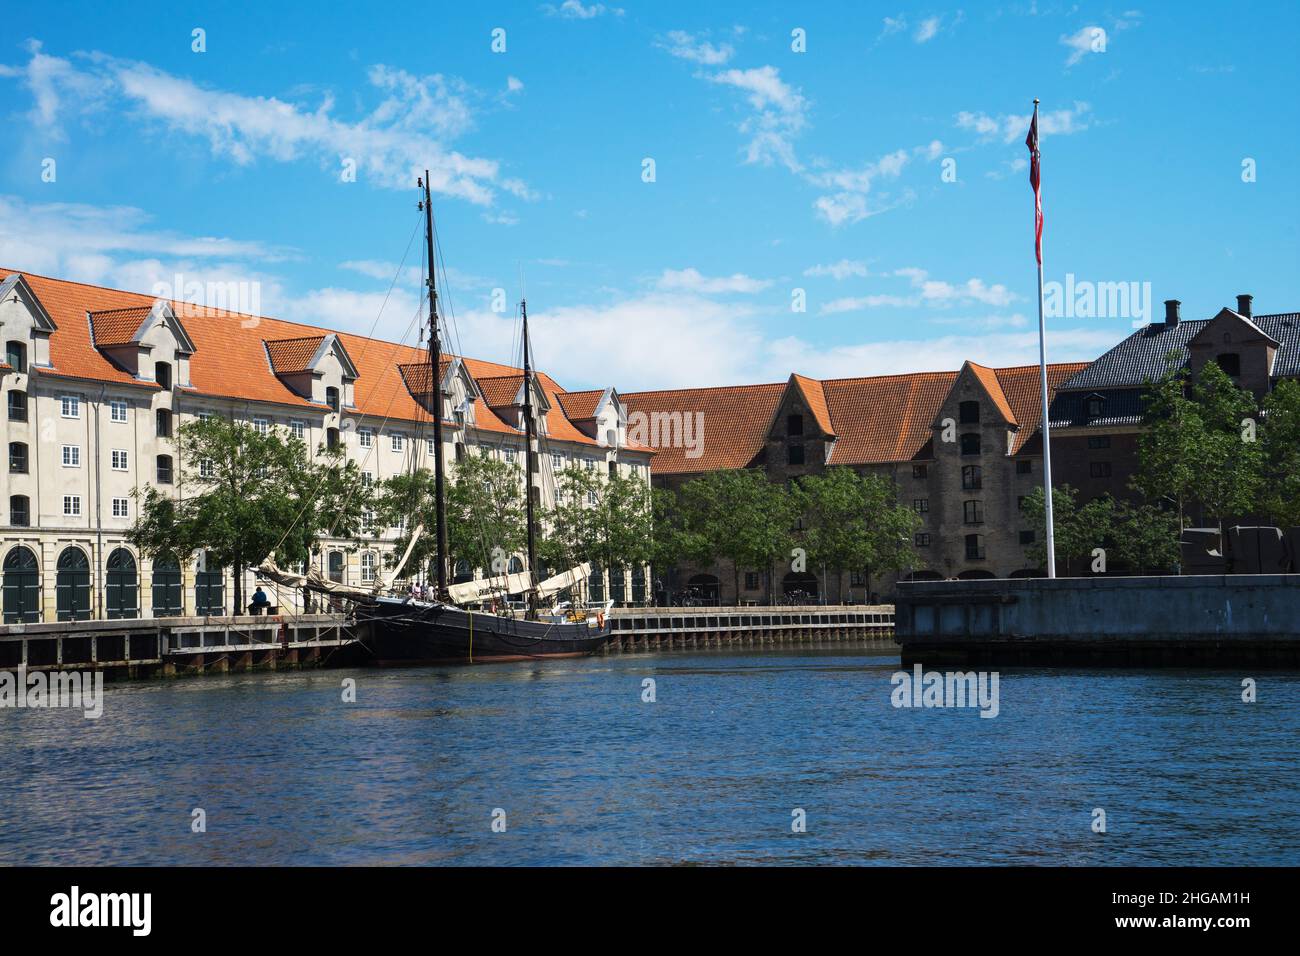 View of waterfront of Copenhagen, Denmark, old houses with tiled roofs and a sailing ship with lowered sails on a wooden dock on a sunny summer day. Stock Photo